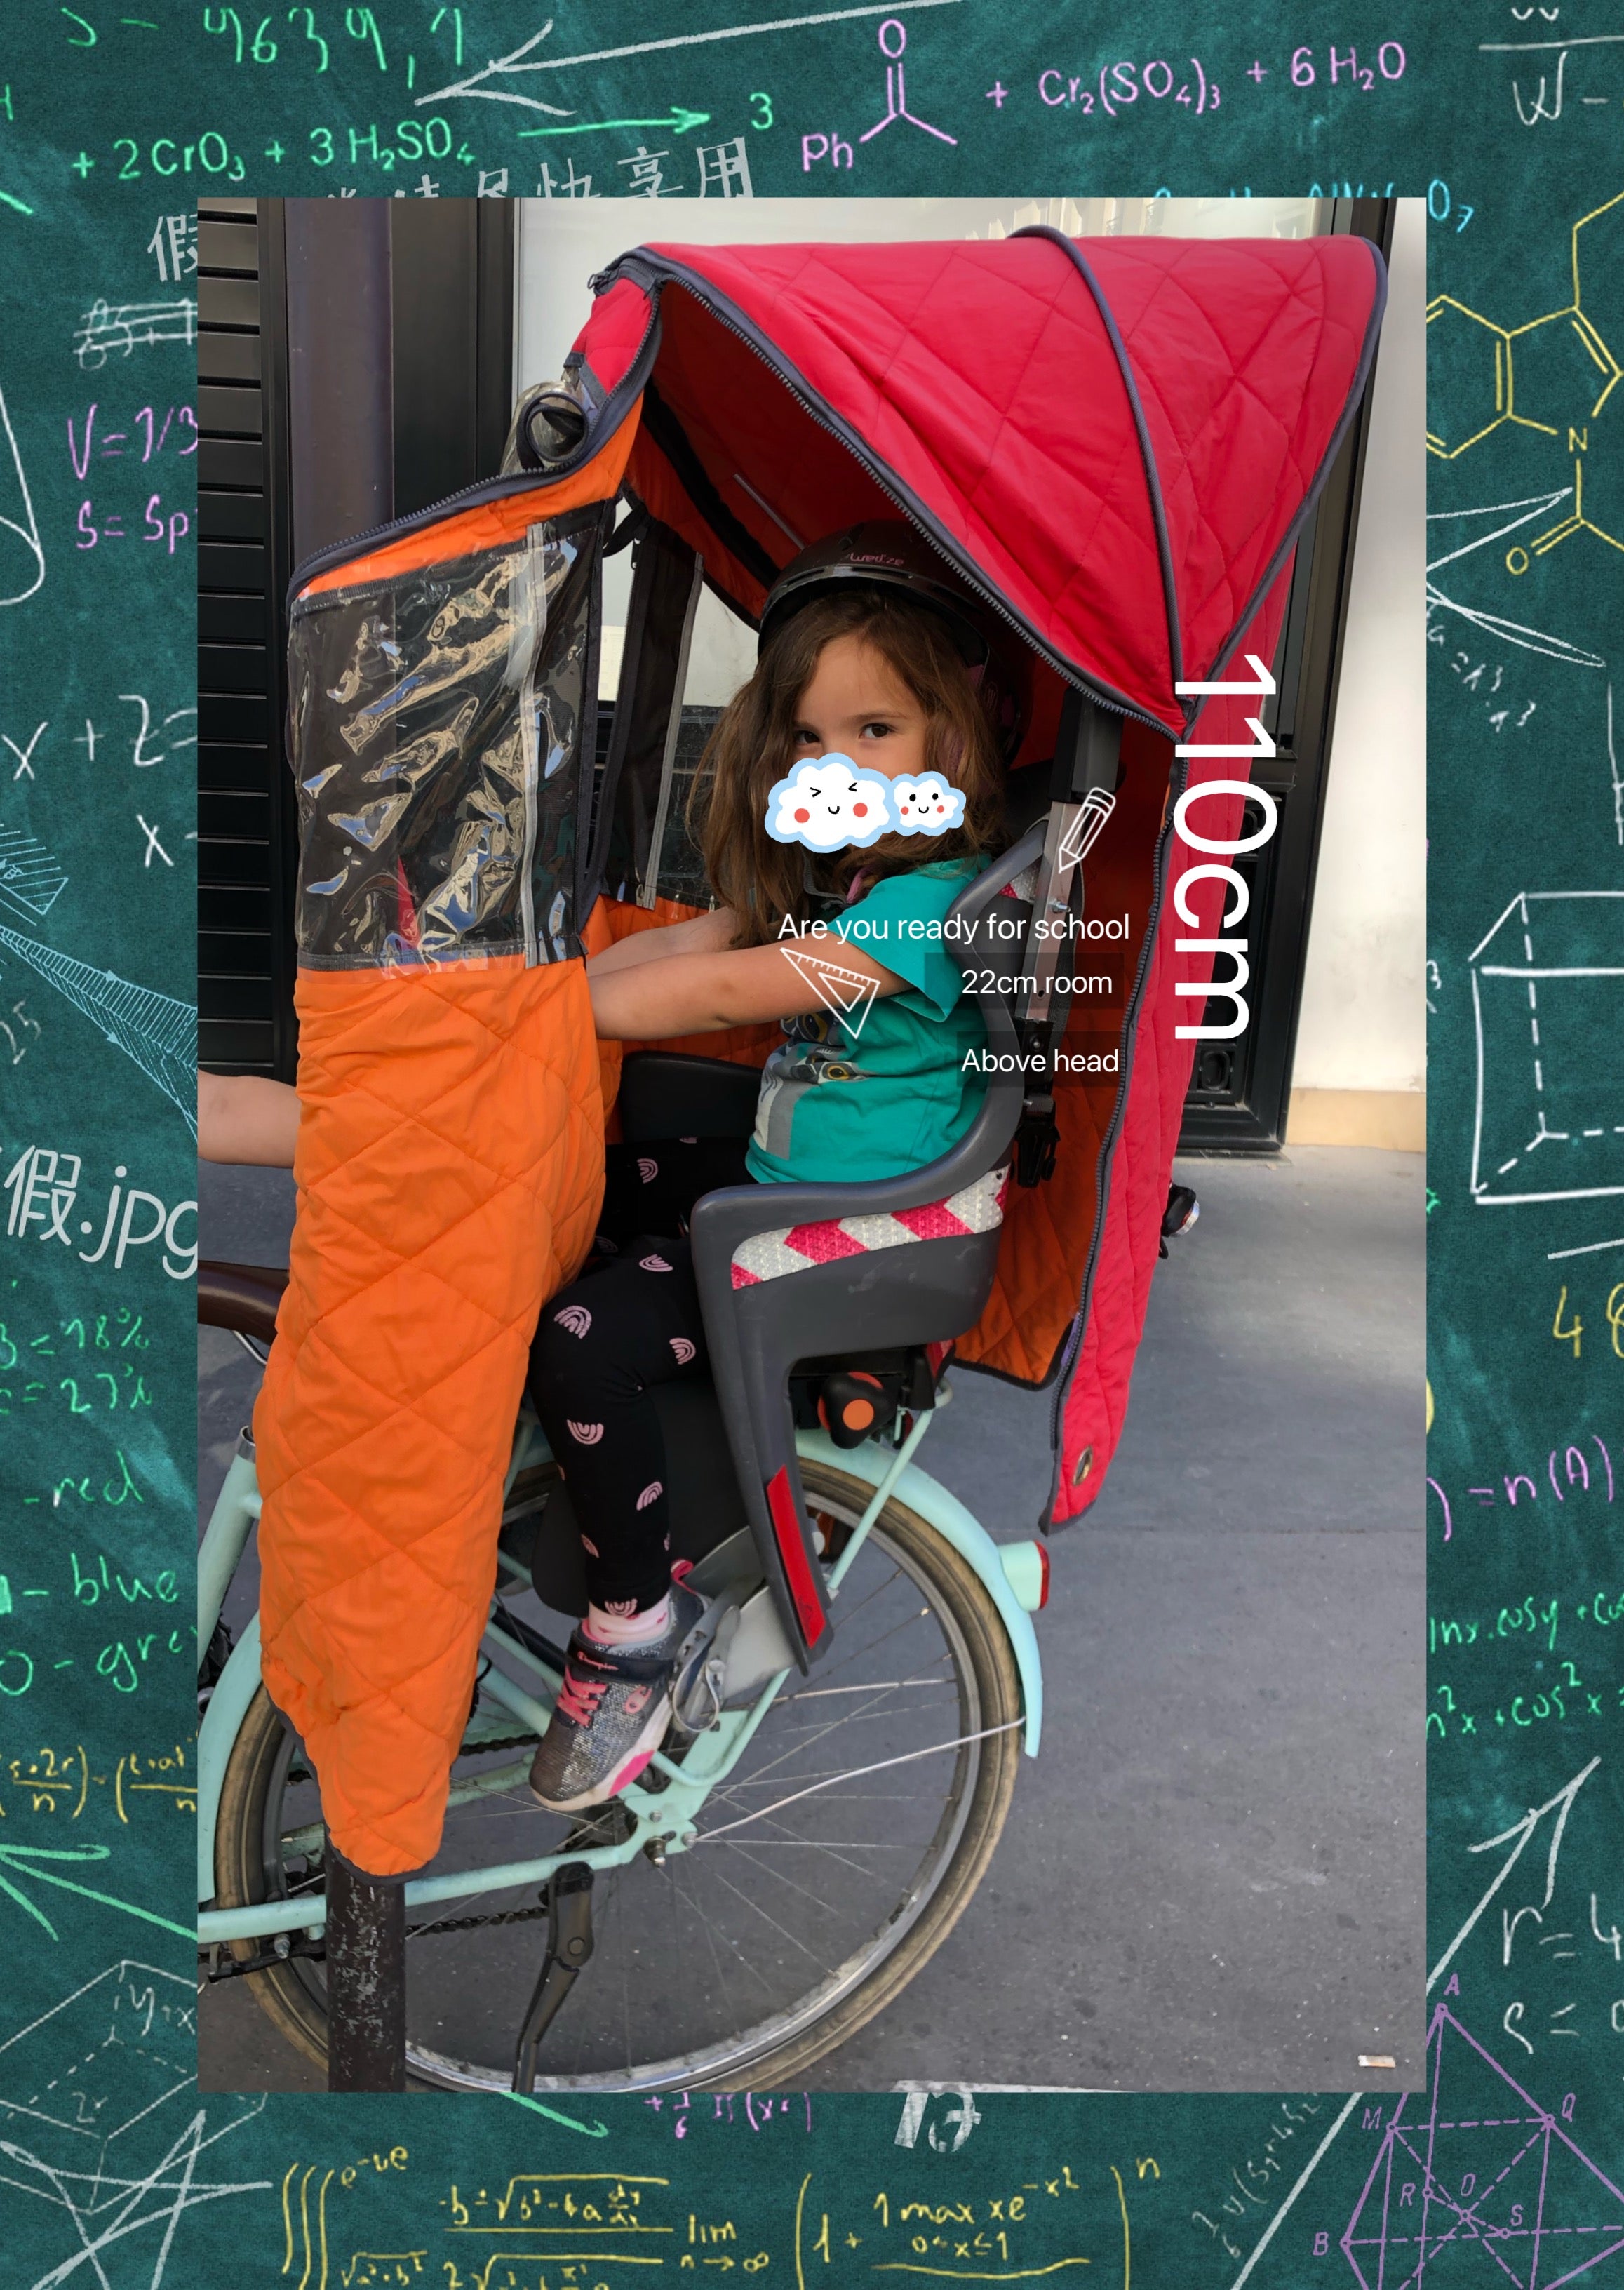 Children's rain cover for bicycle seat